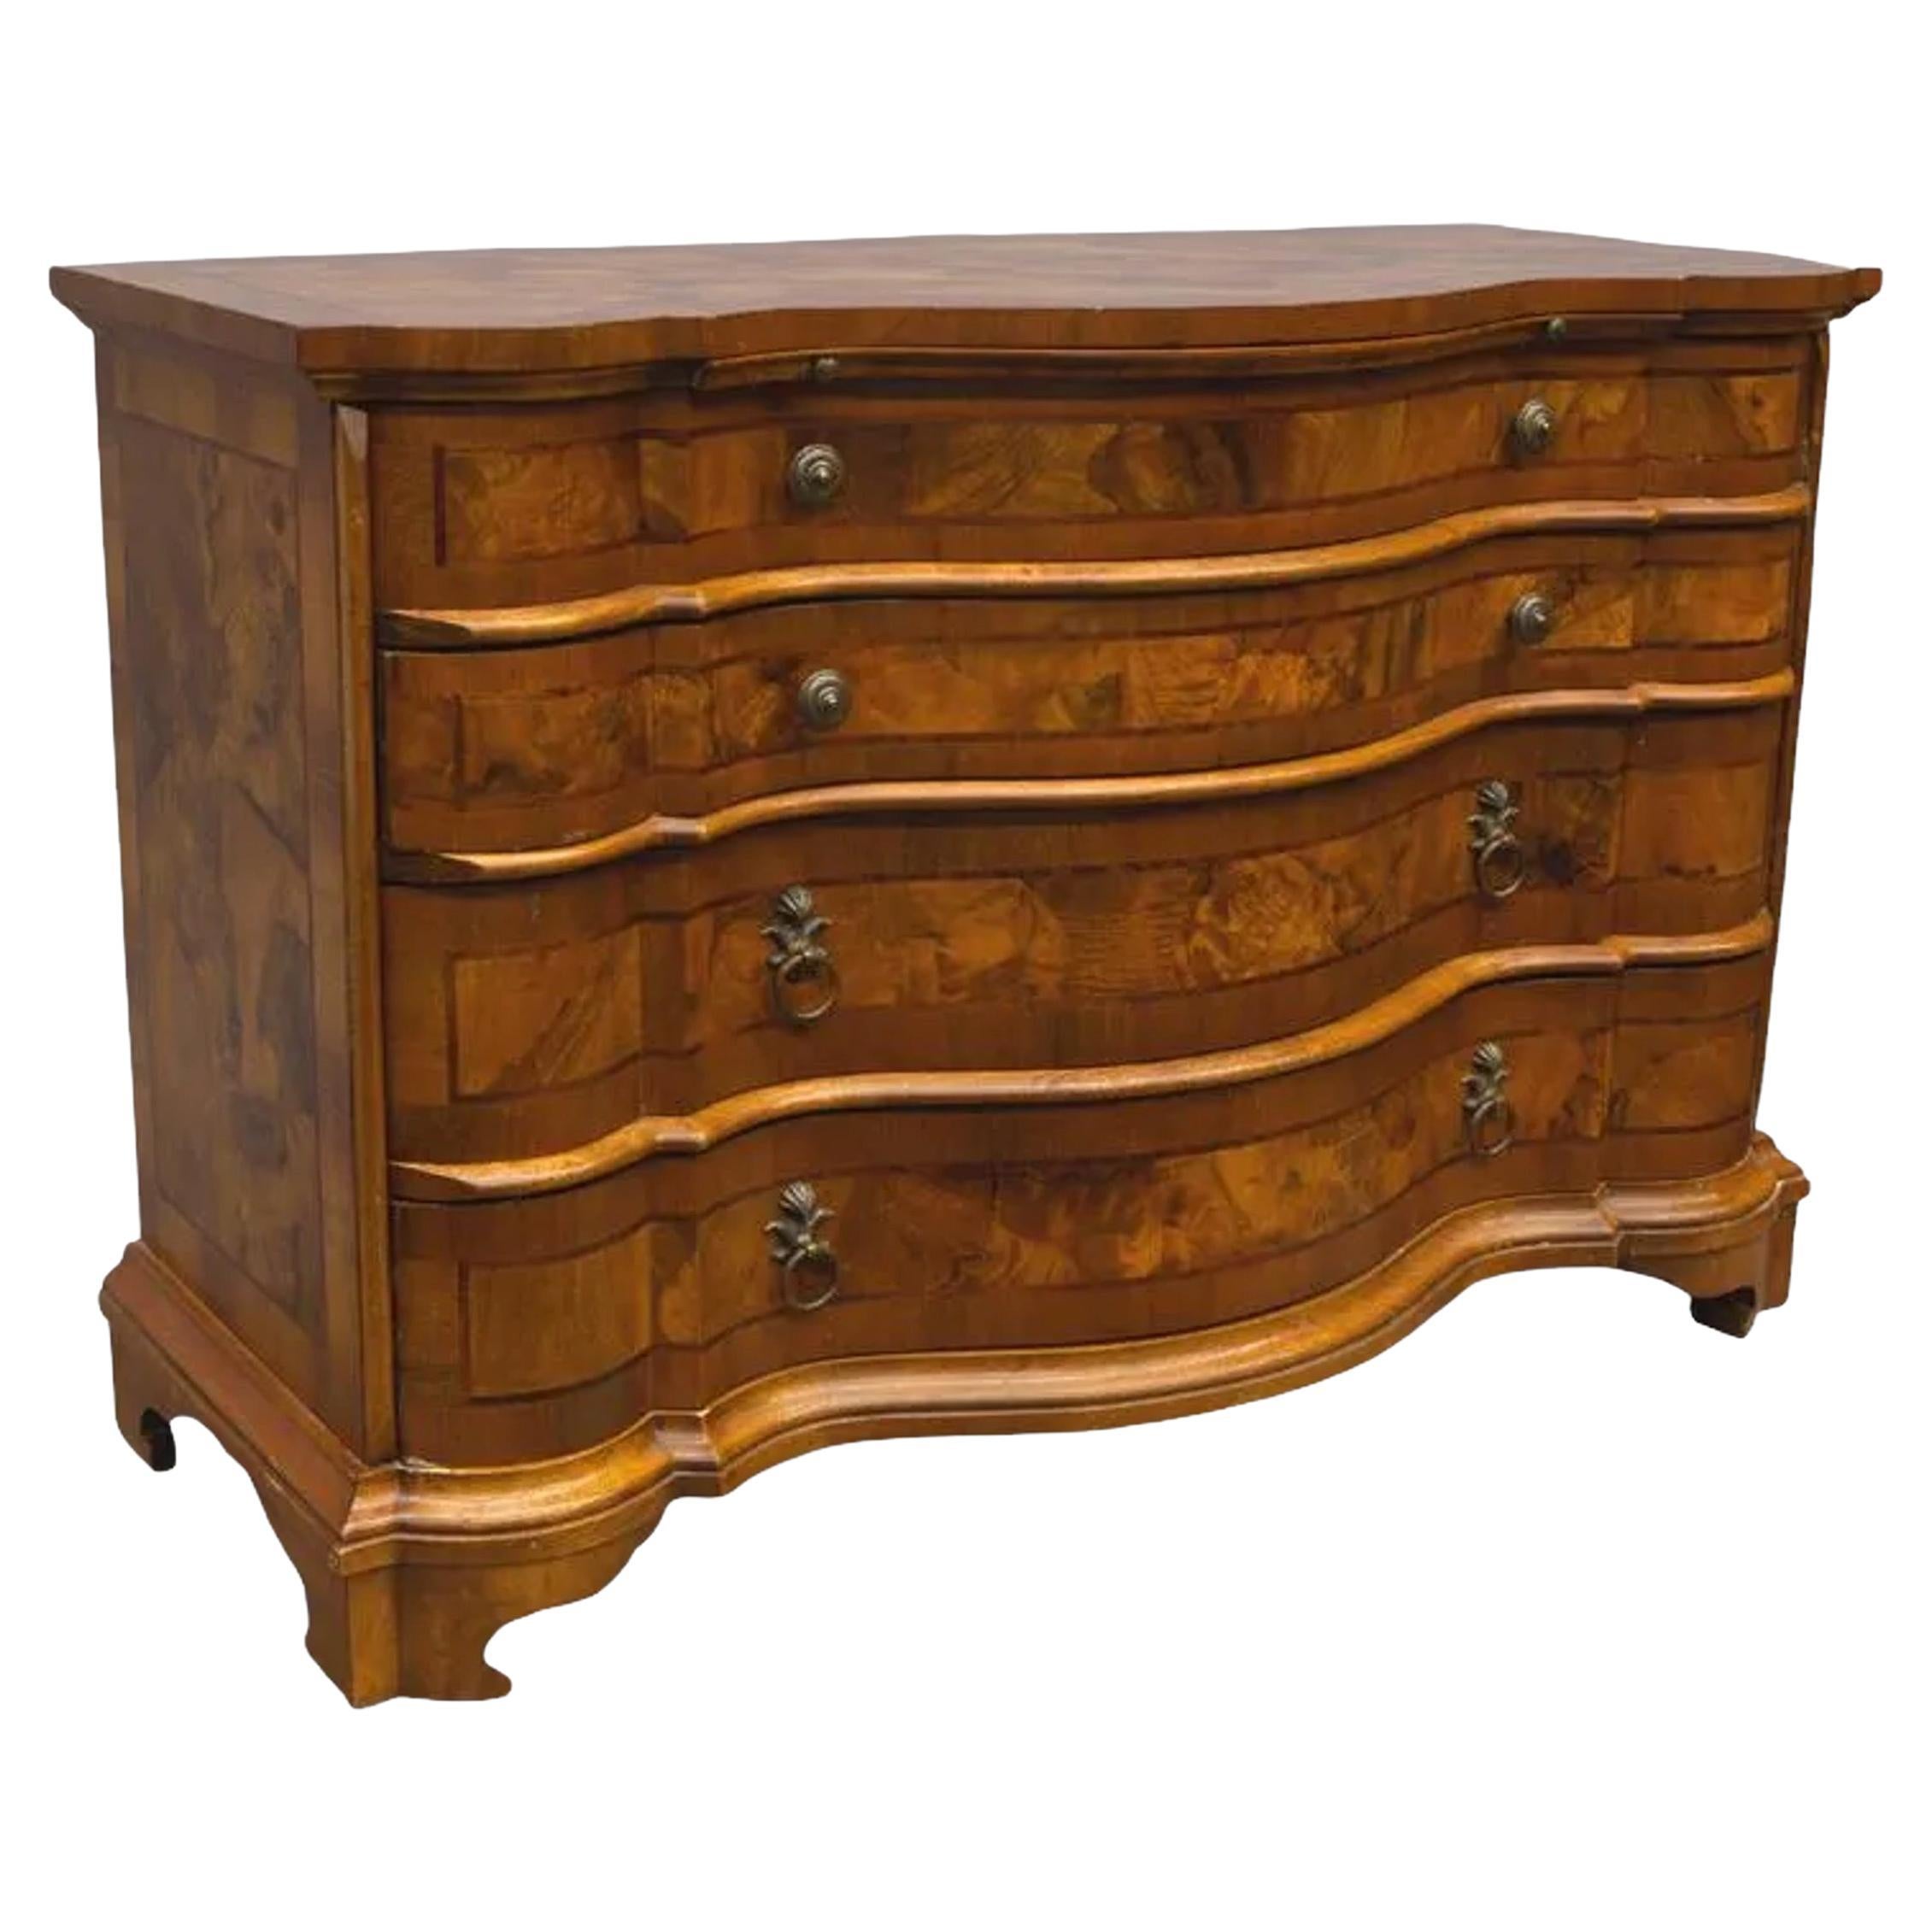 Circa 1750s German Oxbow Shaped Walnut Commode For Sale